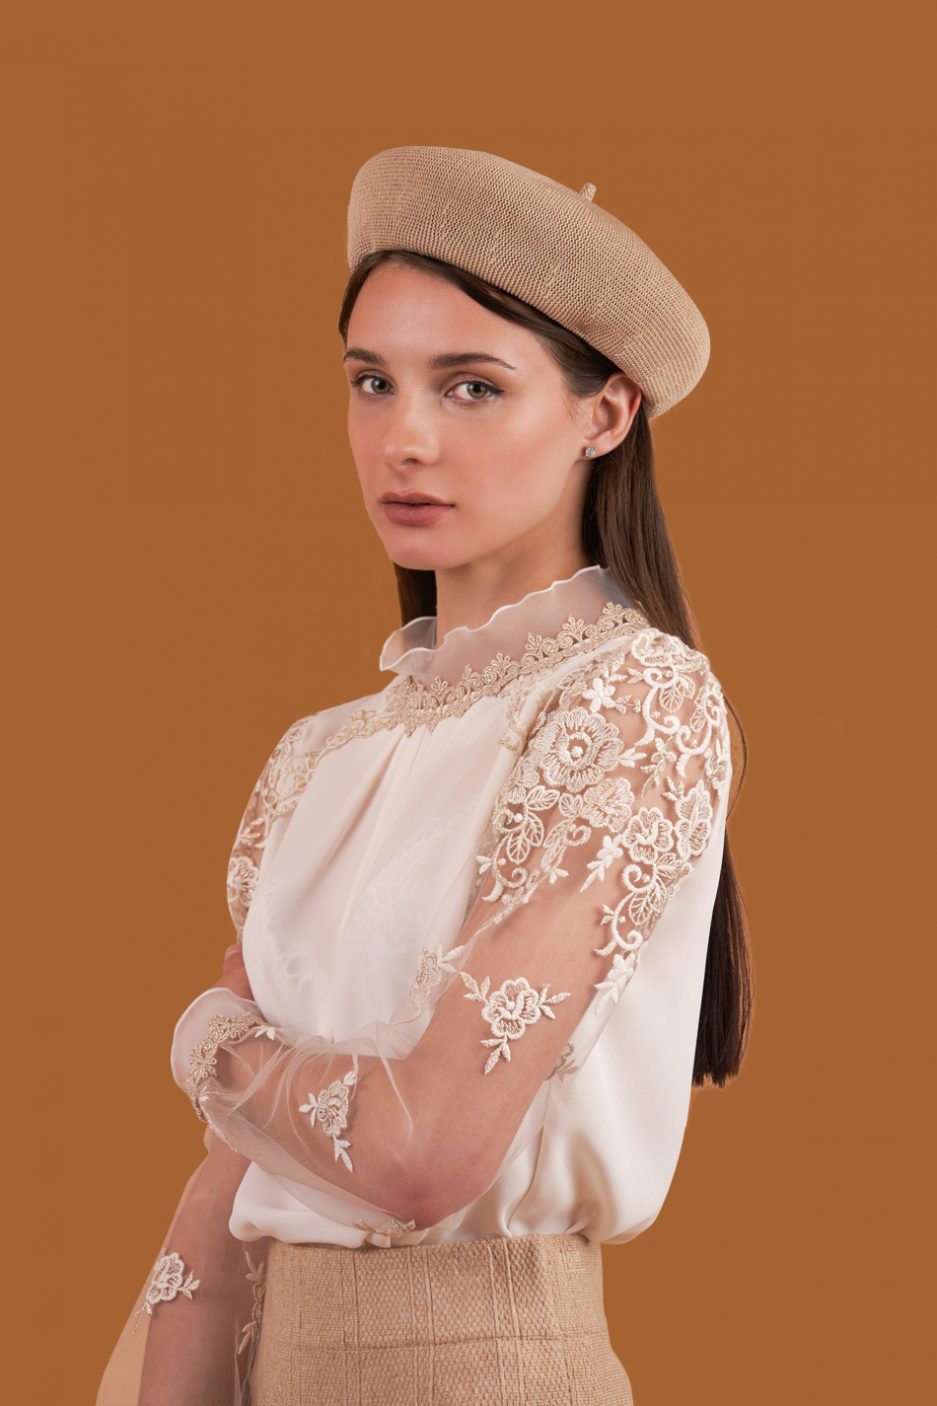 https://op-clients.s3.ca-central-1.amazonaws.com/2021/07/1-lace-collar-and-sleeve-blouse-white1-937x1406.jpg